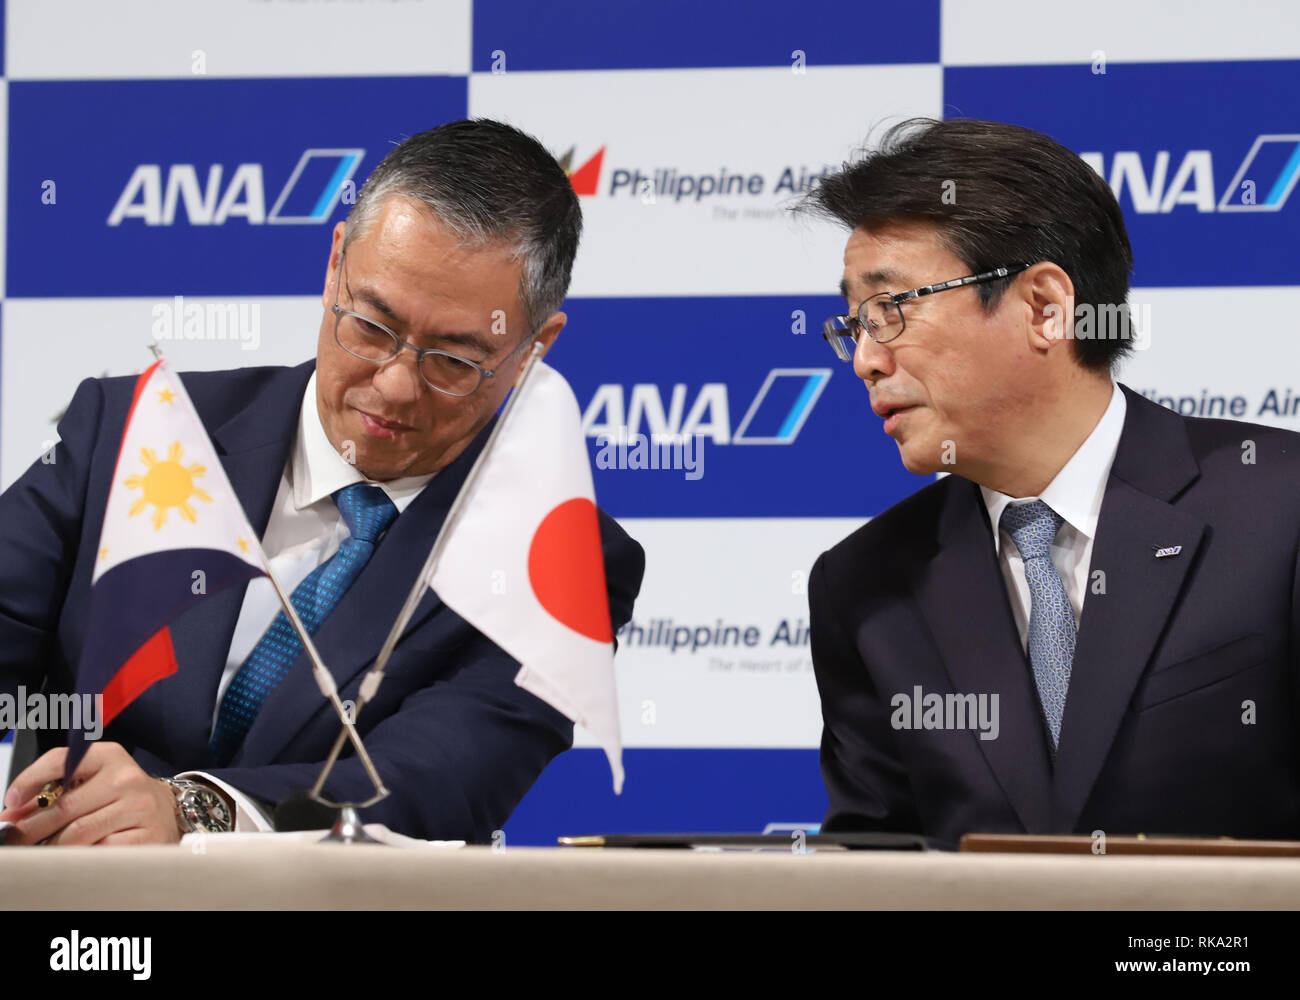 Tokyo, Japan. 8th Feb, 2019. LT Group president and PAL Holdings director Michael Tan (L) chats with ANA Holdings president Shinya Katanozaka as they announce the companies expand their partnerships in Tokyo on Friday, February 8, 2019. ANA Holdings will invest 95 million U.S. dollars to PAL Holdings and acquire 9.5 percent of PAL Holdings shares. Credit: Yoshio Tsunoda/AFLO/Alamy Live News Stock Photo